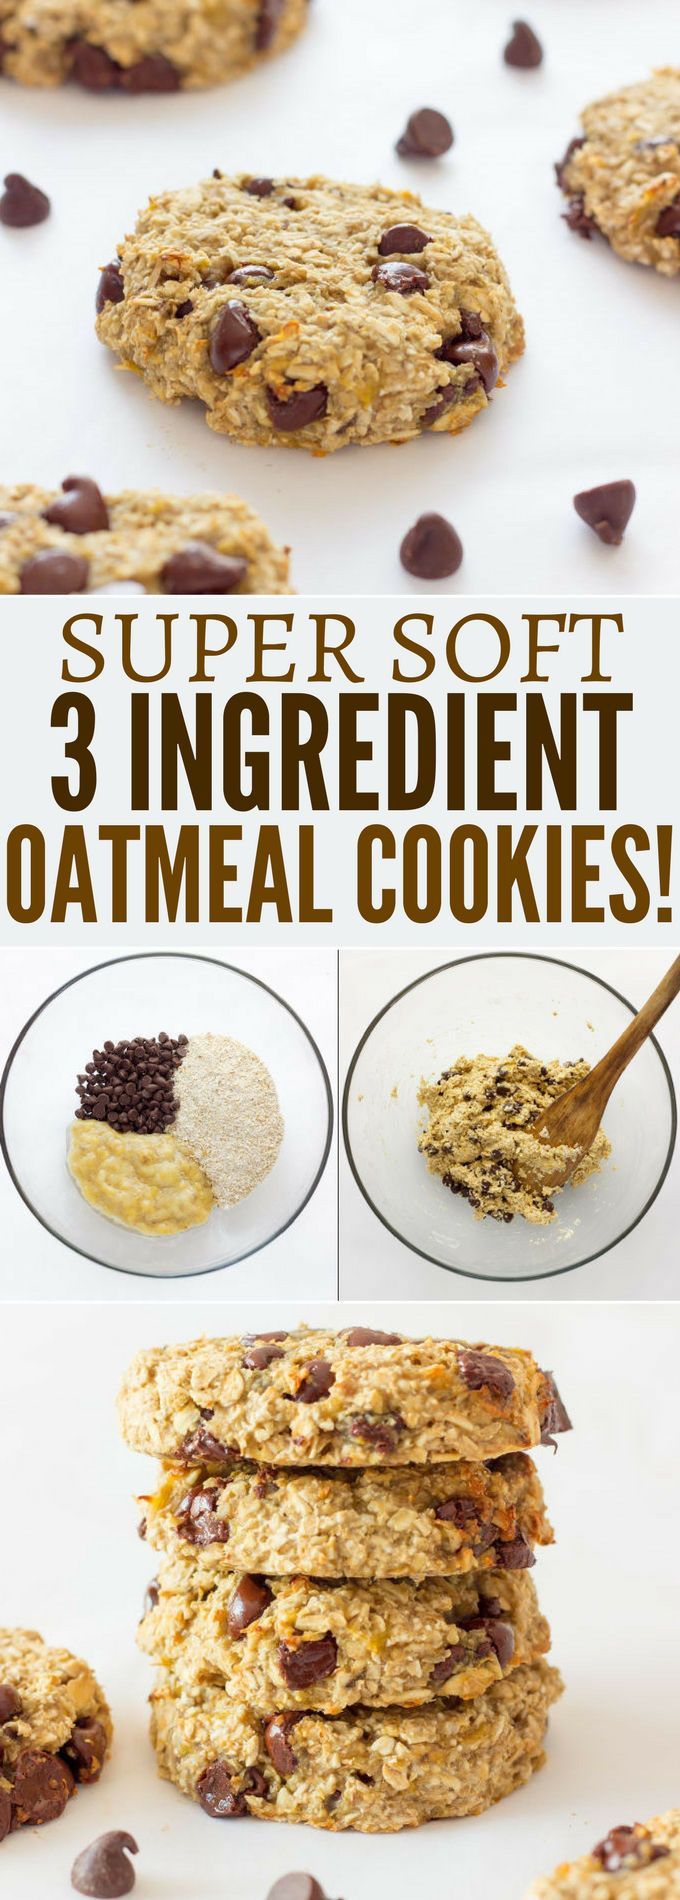 Ready under 20 minutes, these healthy, chewy and soft banana & oatmeal cookies are made with only 3 simple ingredients. They are a